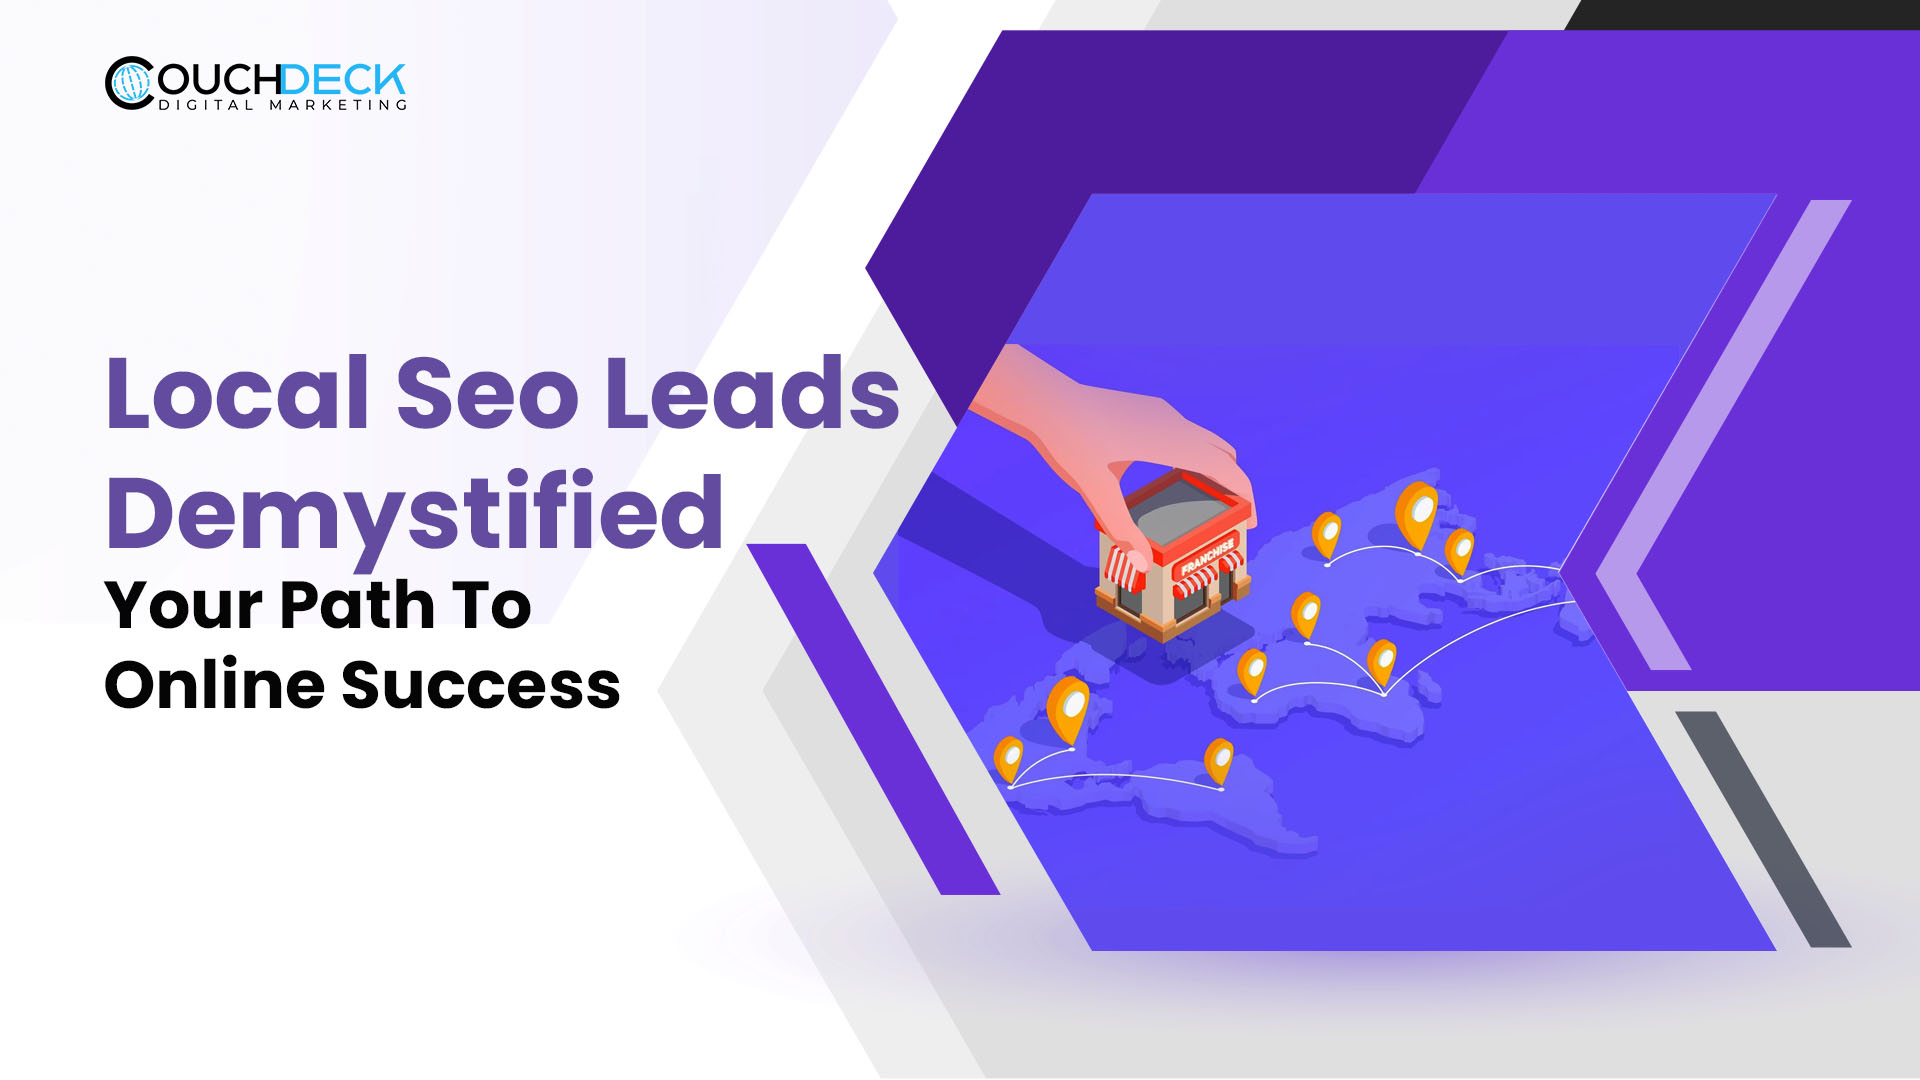 Local Seo Leads Demystified: Your Path To Online Success